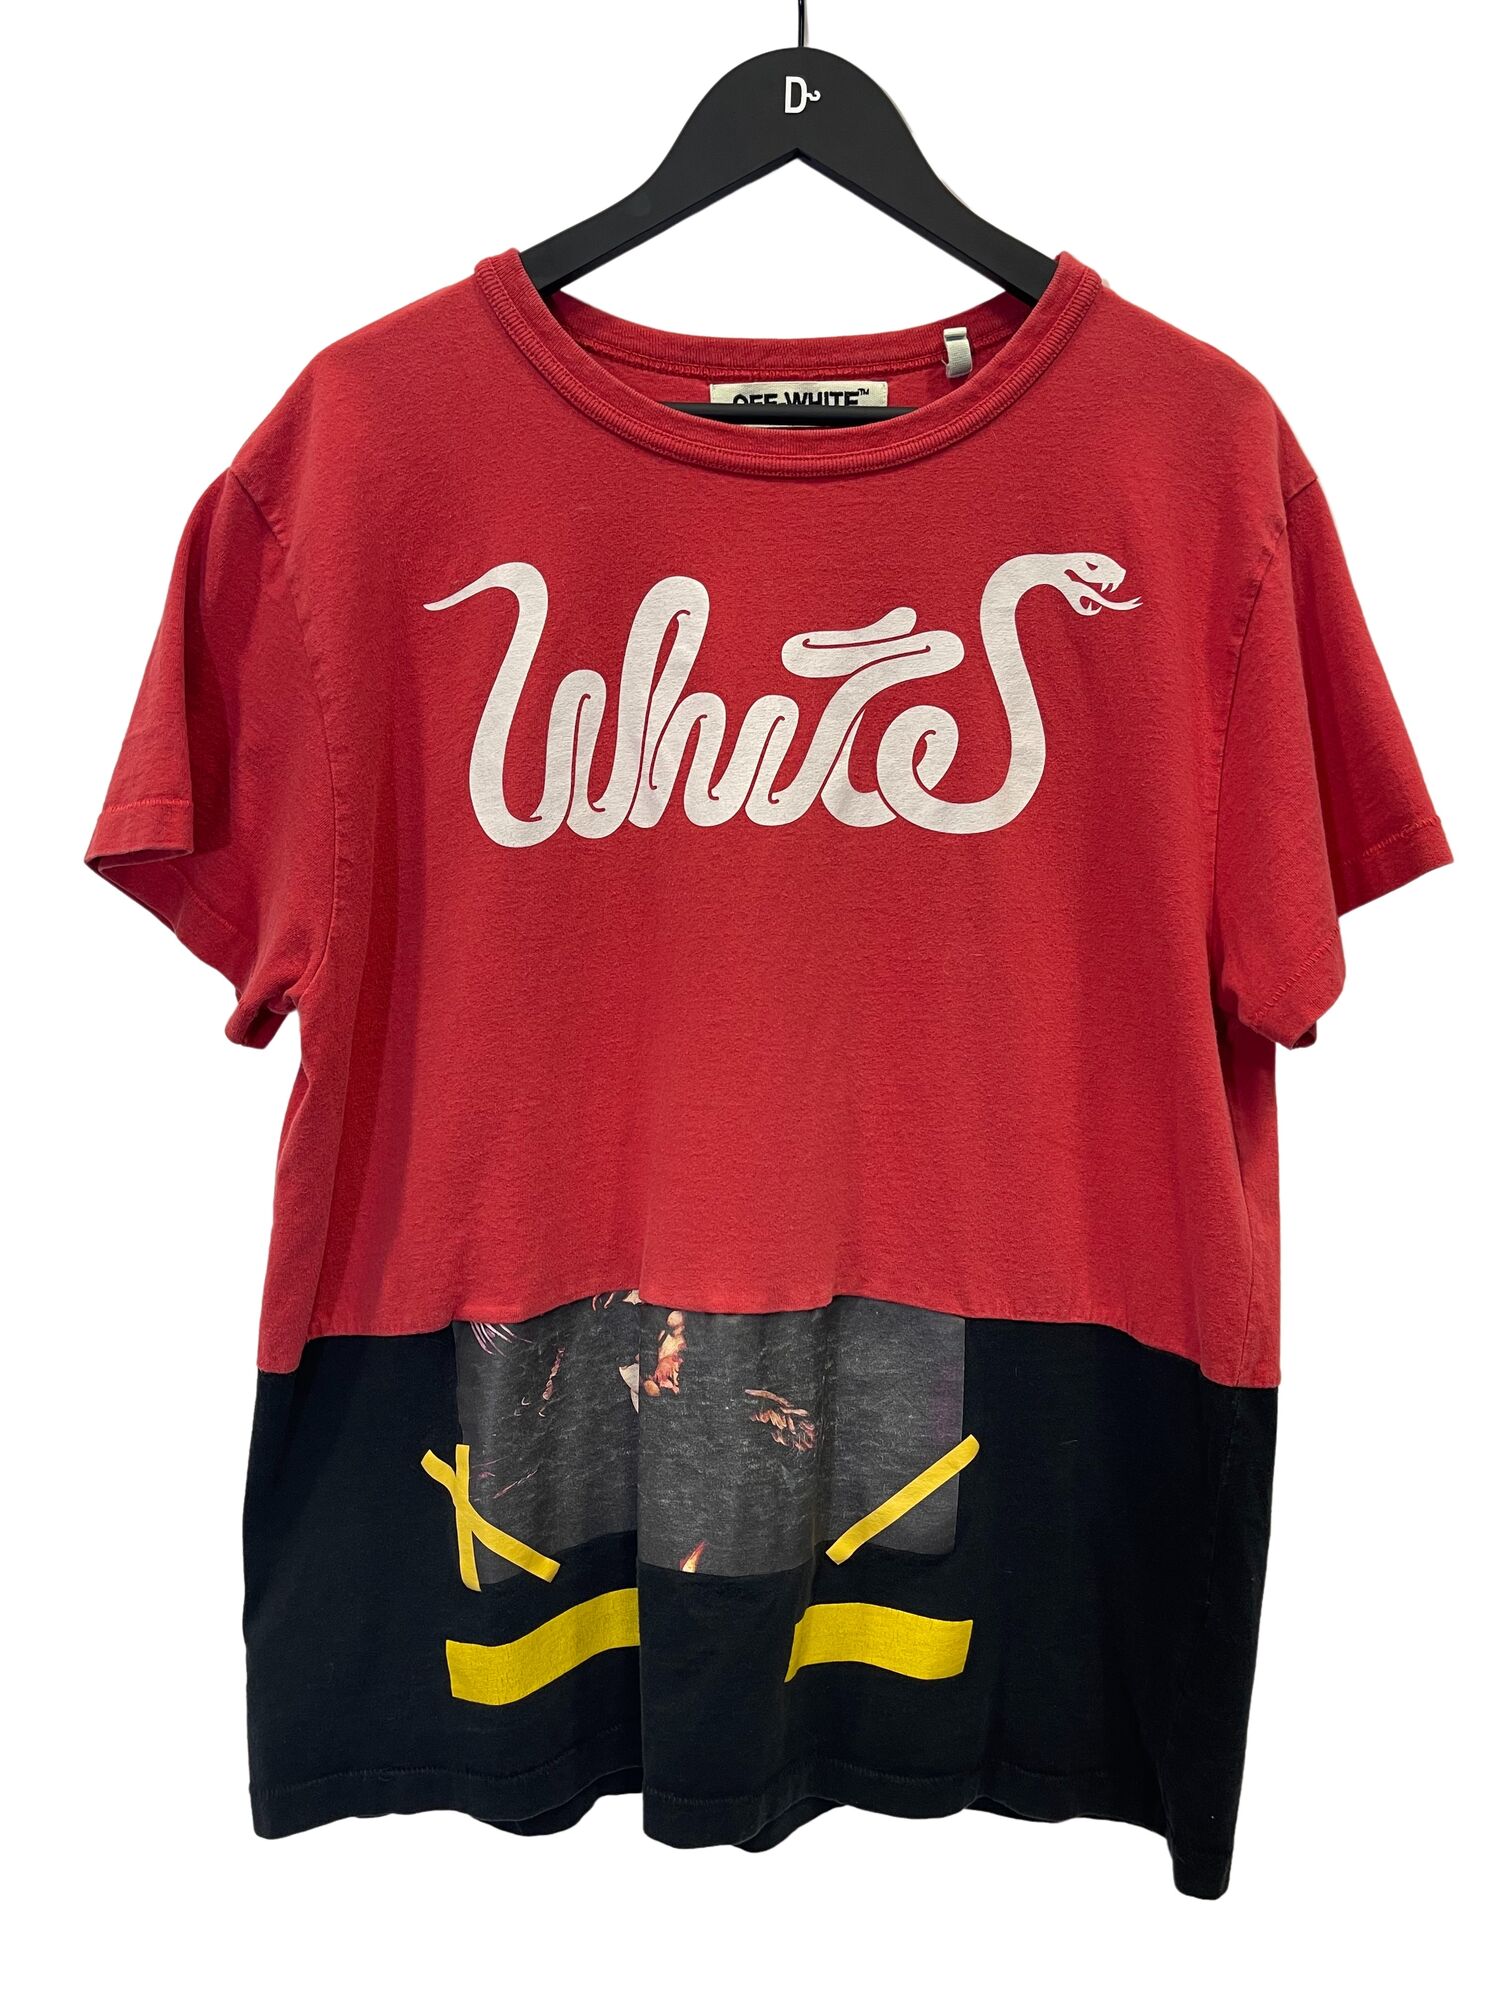 Red printed t-shirt